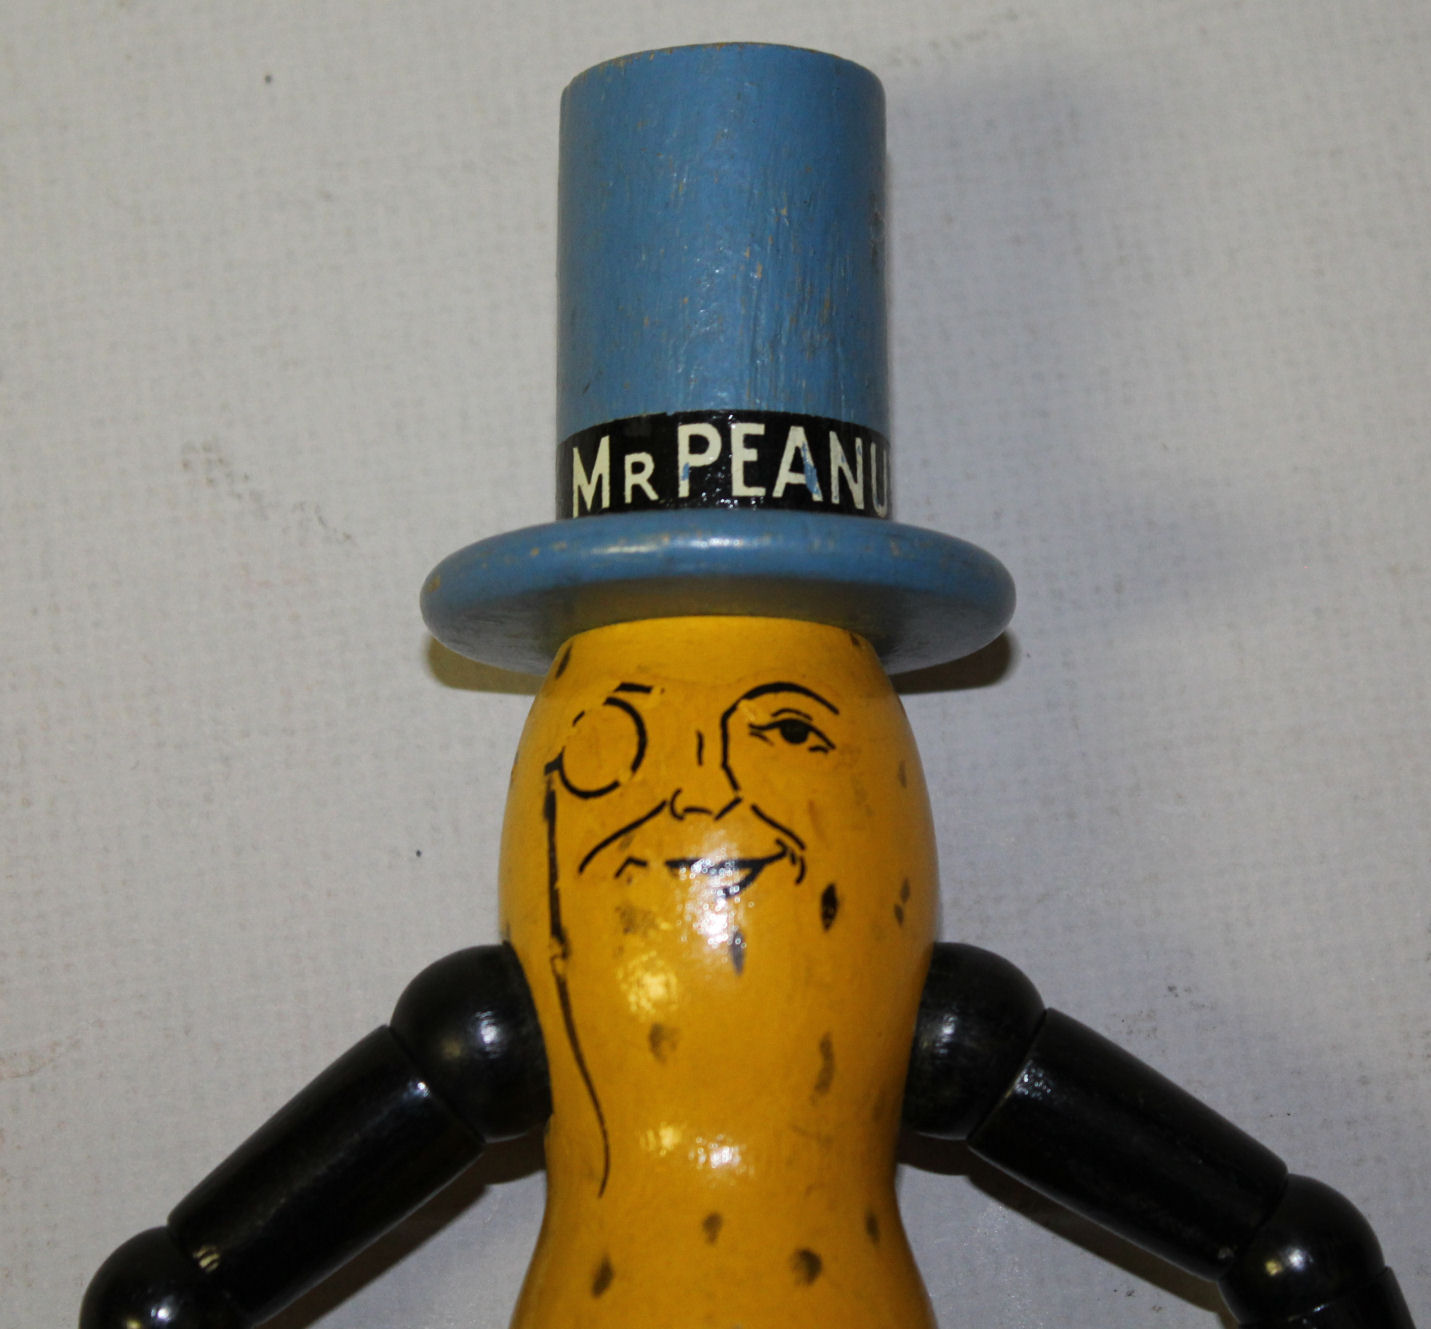 Bargain John's Antiques | Mr Peanut Planters Advertising Wood Segmented Toy by ...